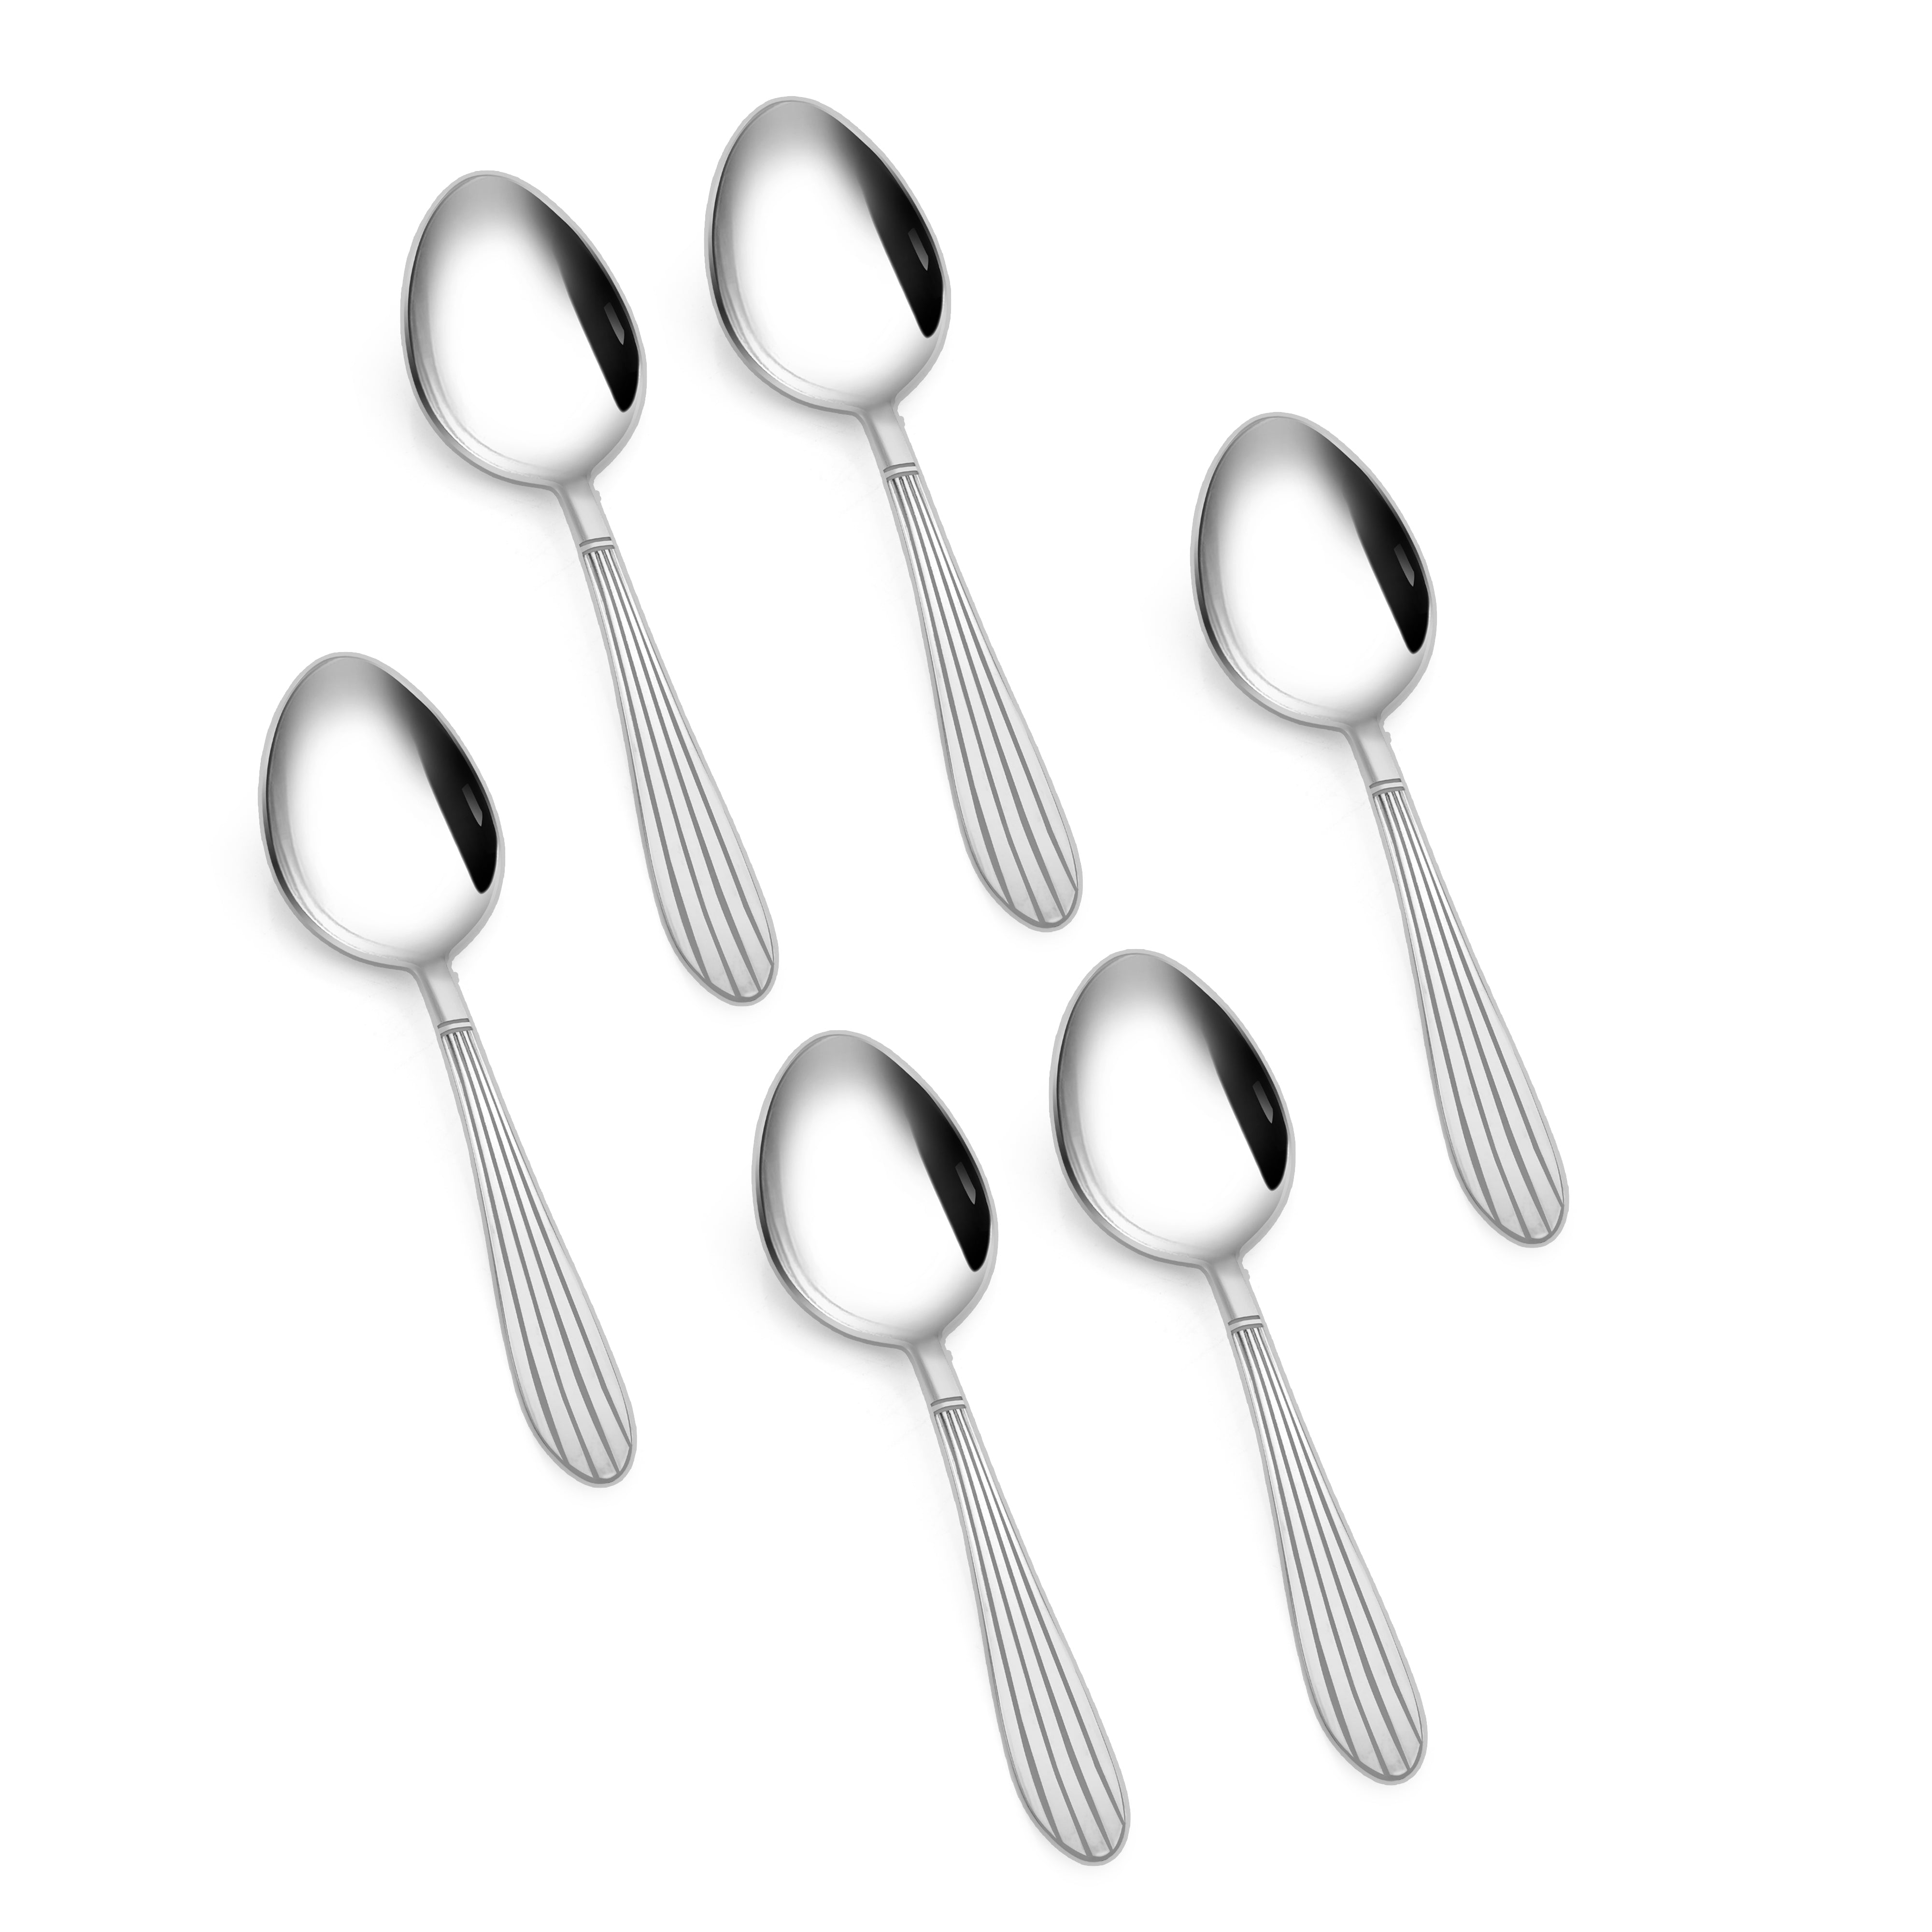 Arias by Lara Dutta Sysco Cutlery Set of 24 With Stand (Silver)